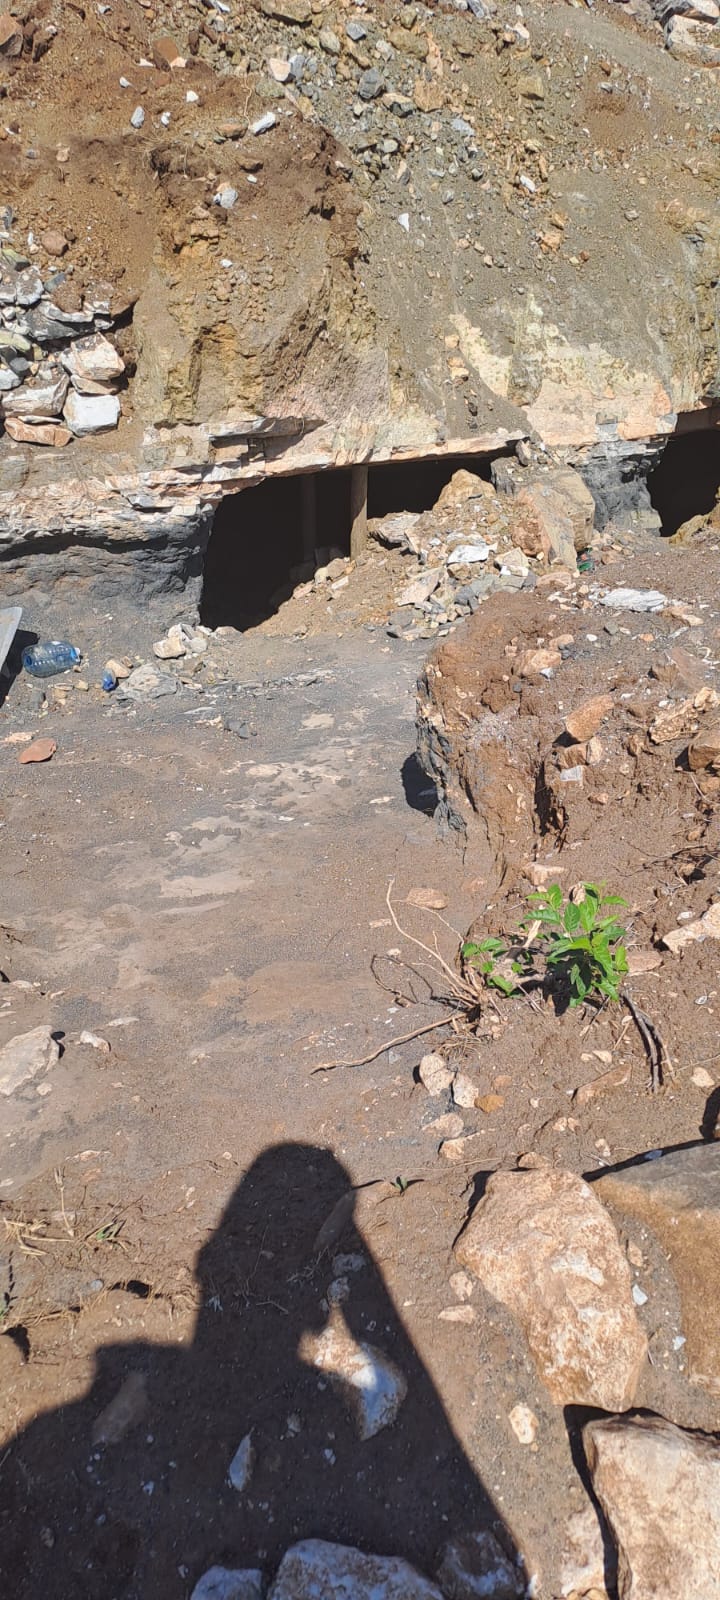 Police investigate an inquest case after the alleged illegal miner killed by rock at Atok, Bogalatladi Village